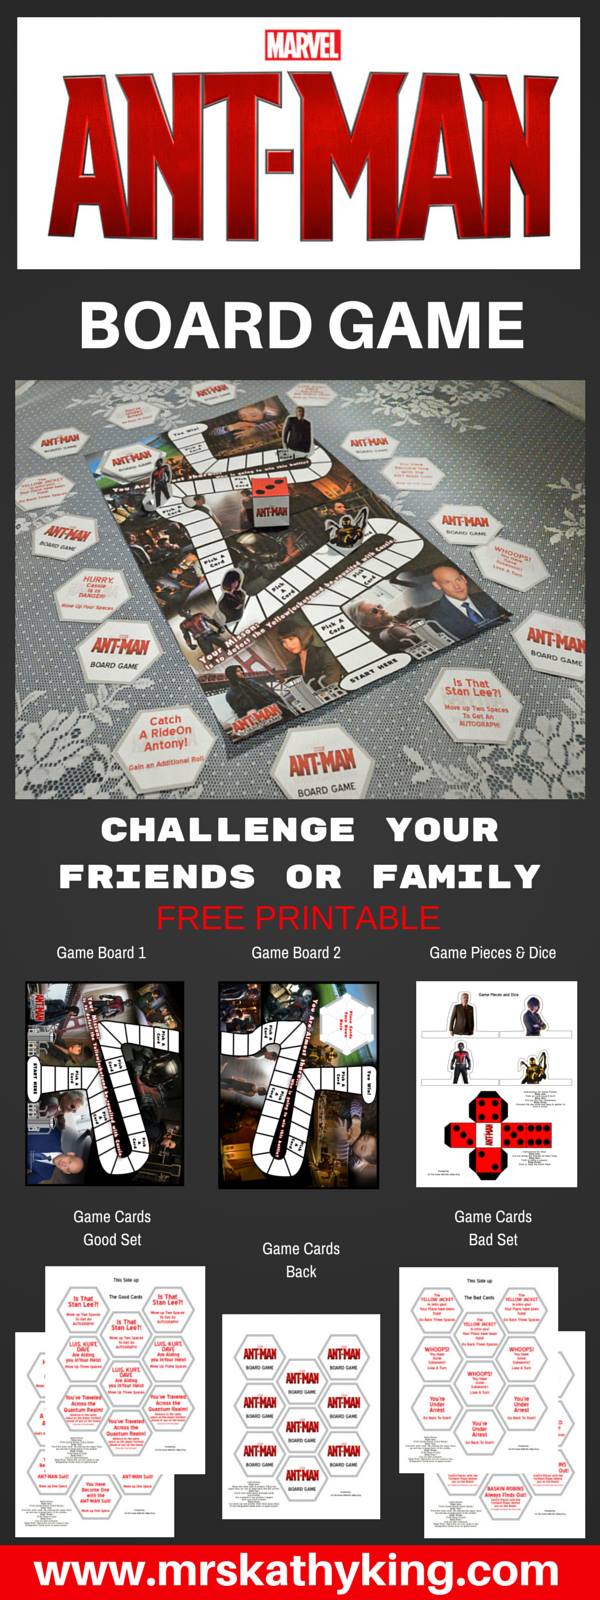 Looking for a fun AntMan board game to play? Here is a Free Ant-Man Broard Game Printable we made to celebrate the release of the movie. The game includes 36 Pick a Cards 4 Game Figures, Board & die #antmanevent #antman